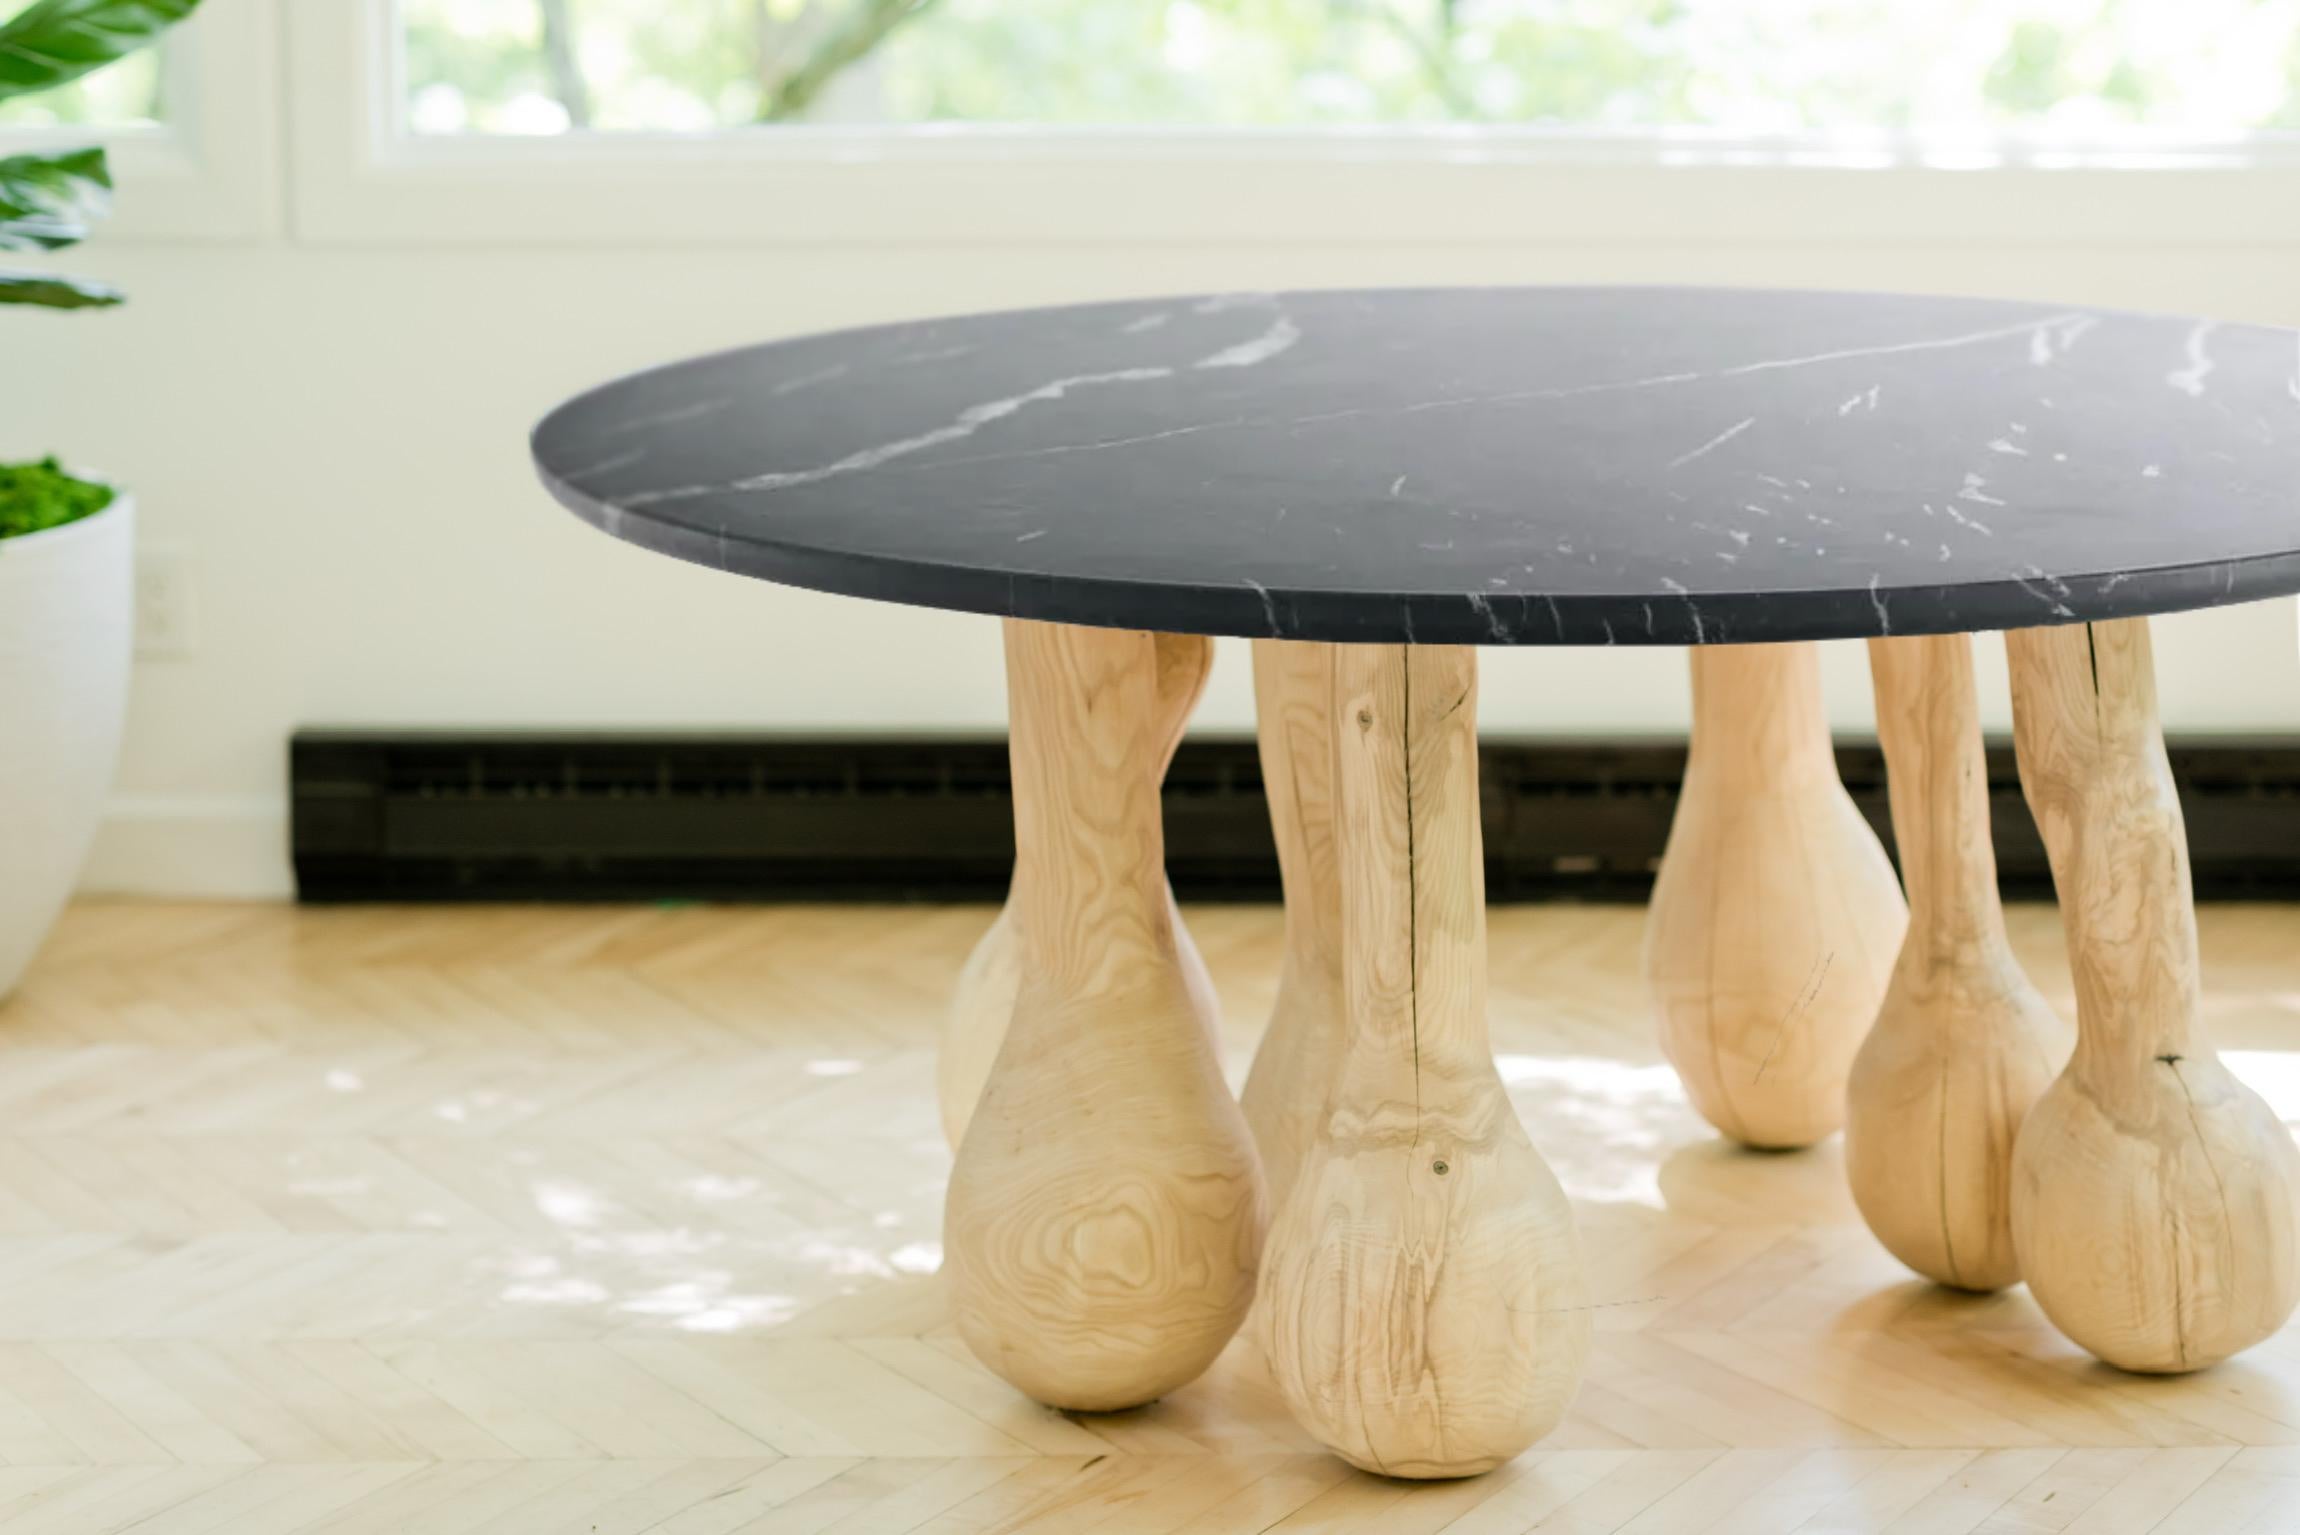 Jigs Table by Dean and Dahl

L 67.5